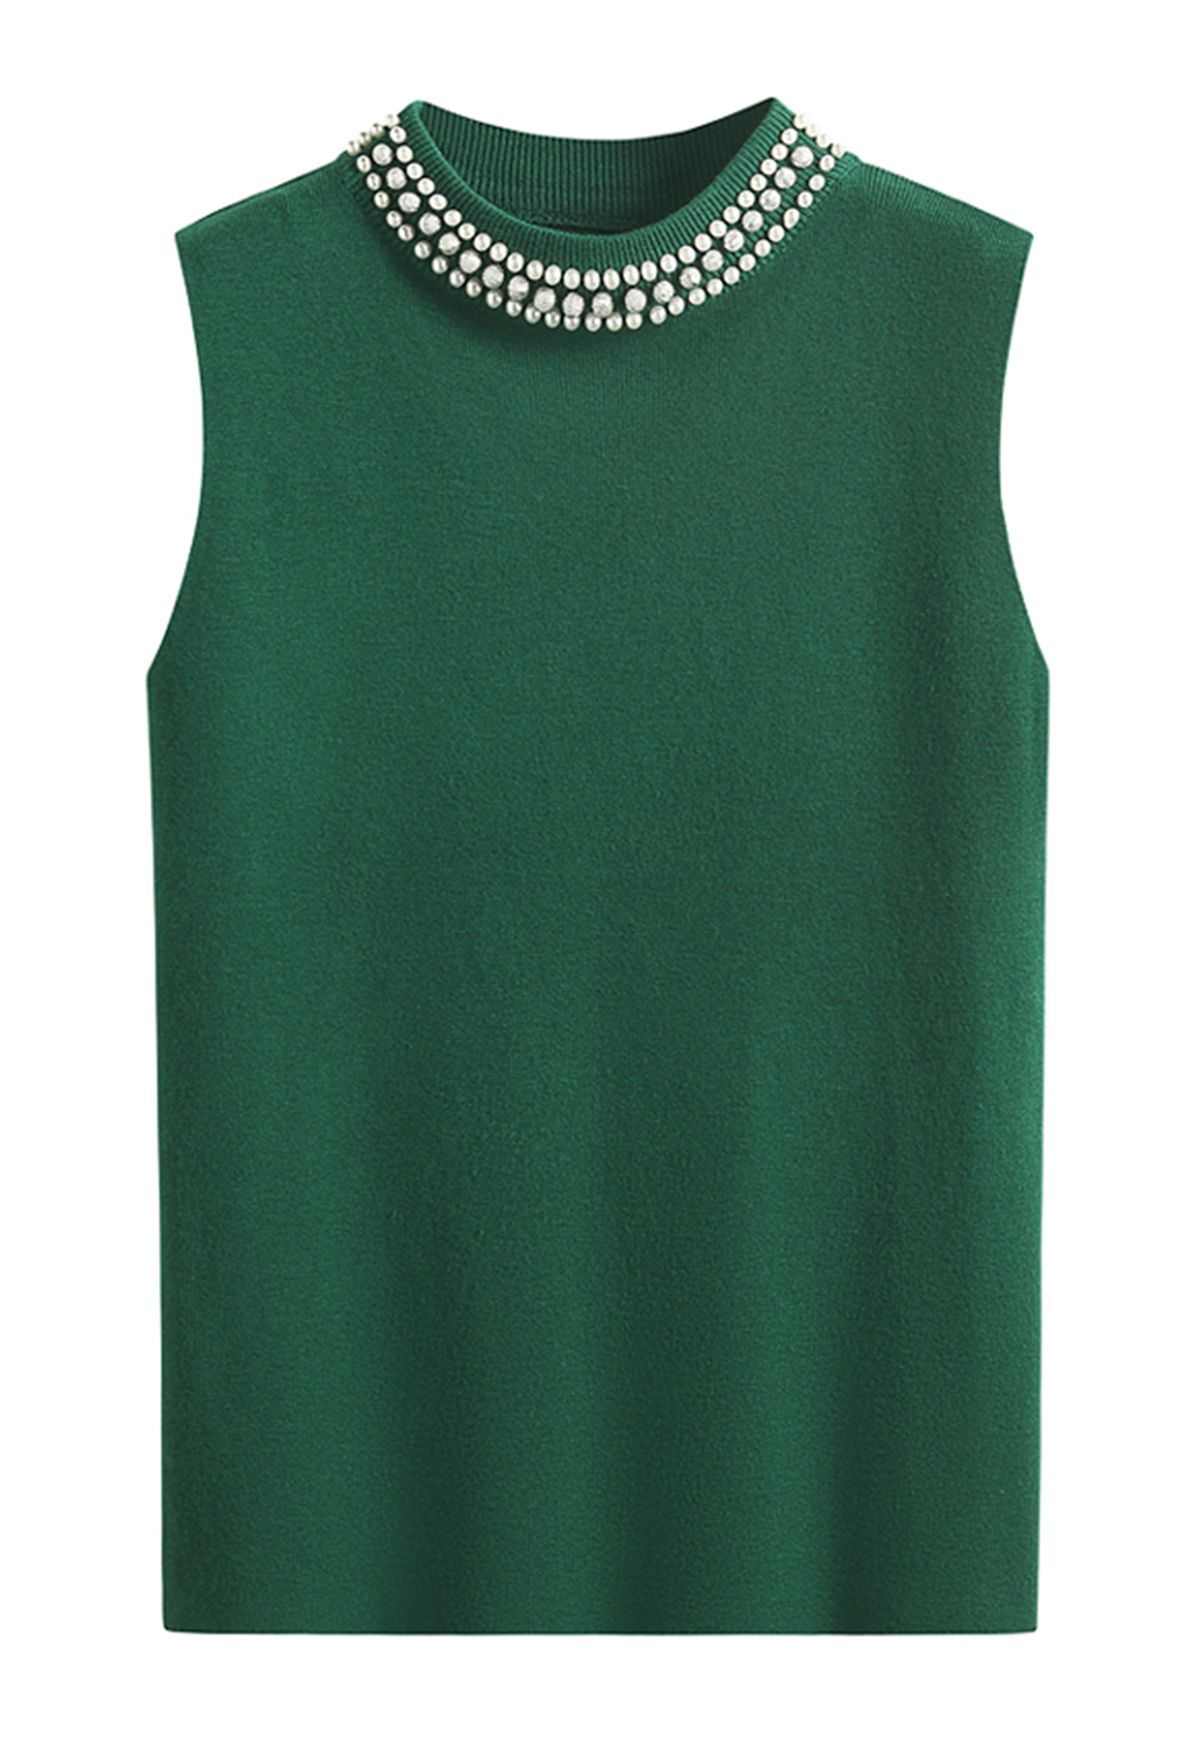 Pearl Embellished Mock Neck Sleeveless Knit Top in Dark Green - Retro,  Indie and Unique Fashion